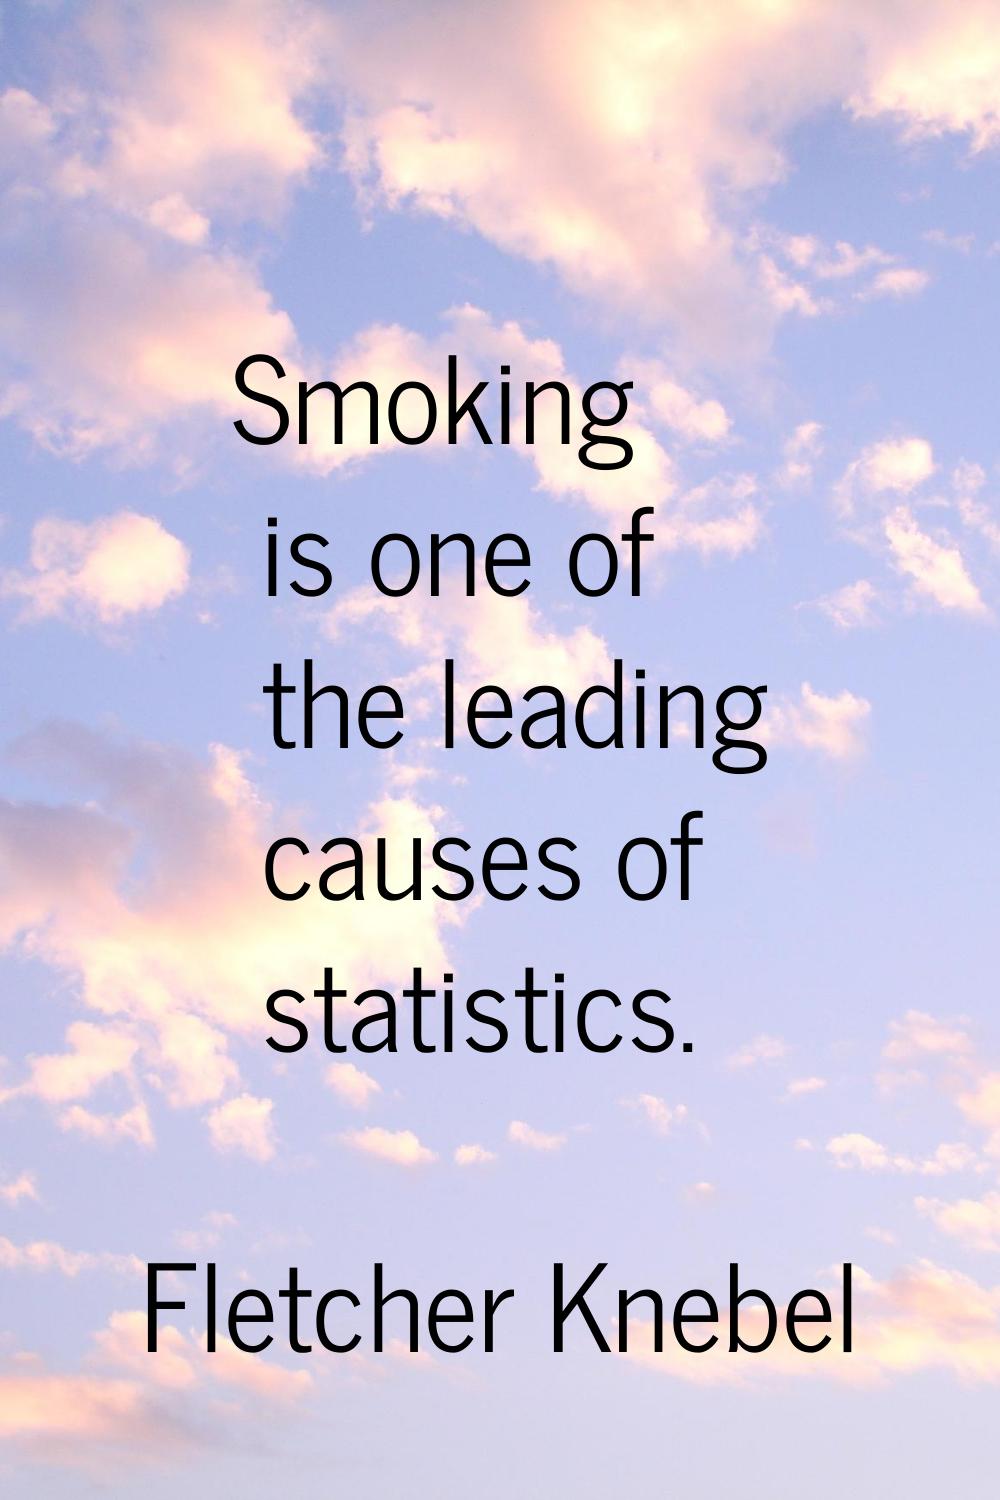 Smoking is one of the leading causes of statistics.